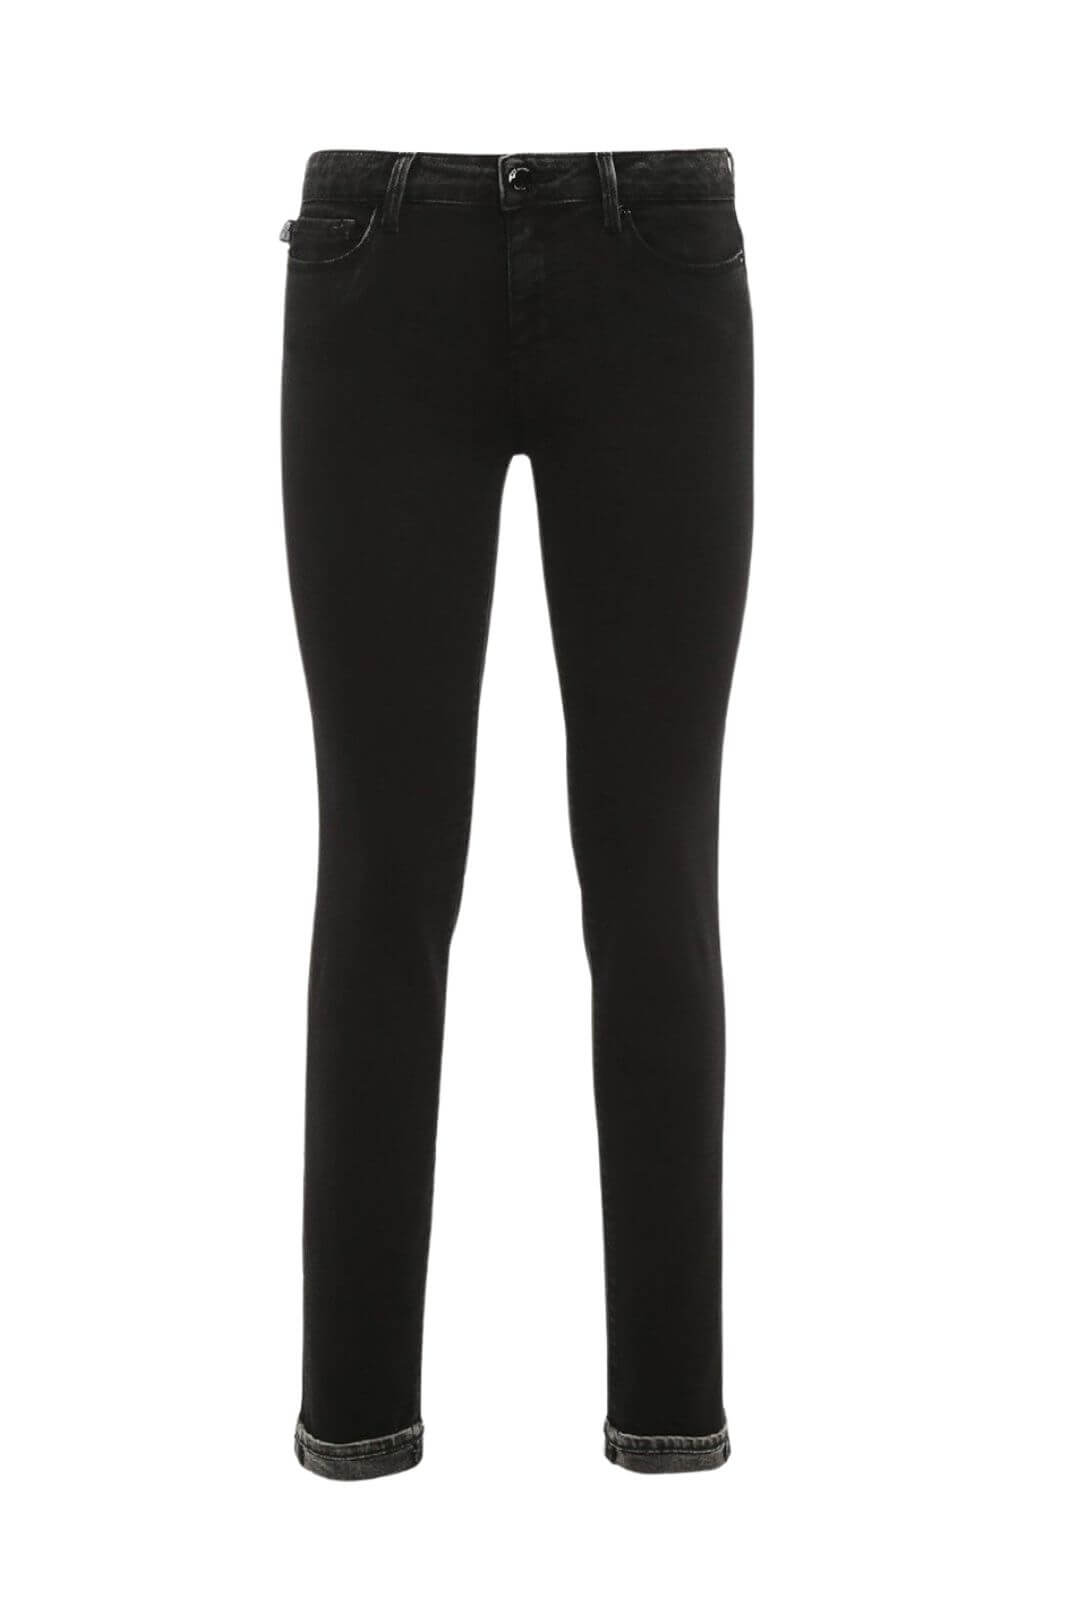 Love Moschino jeans donna slim fit